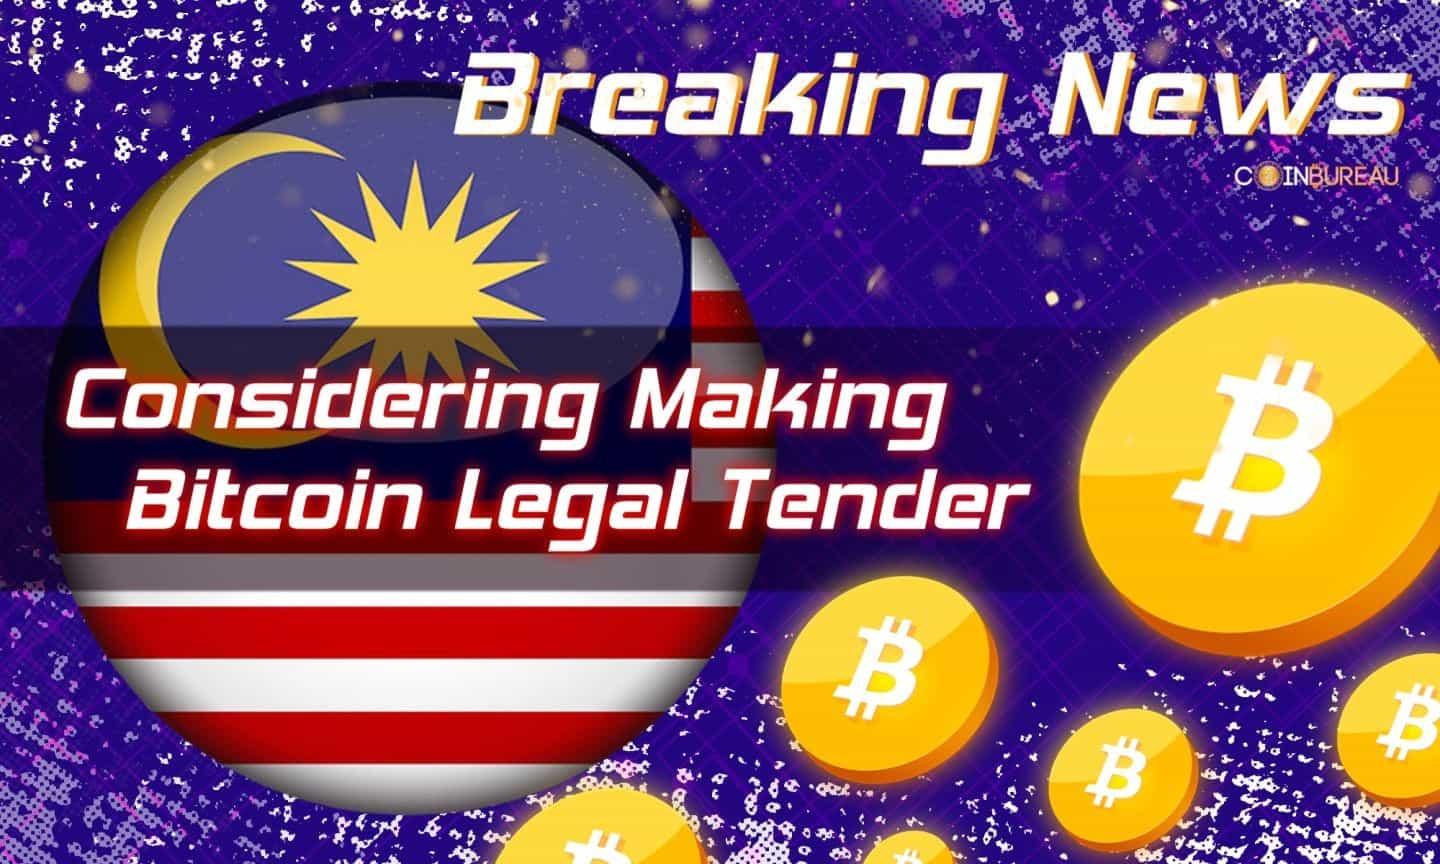 Malaysia Considering Making Bitcoin Legal Tender: Report